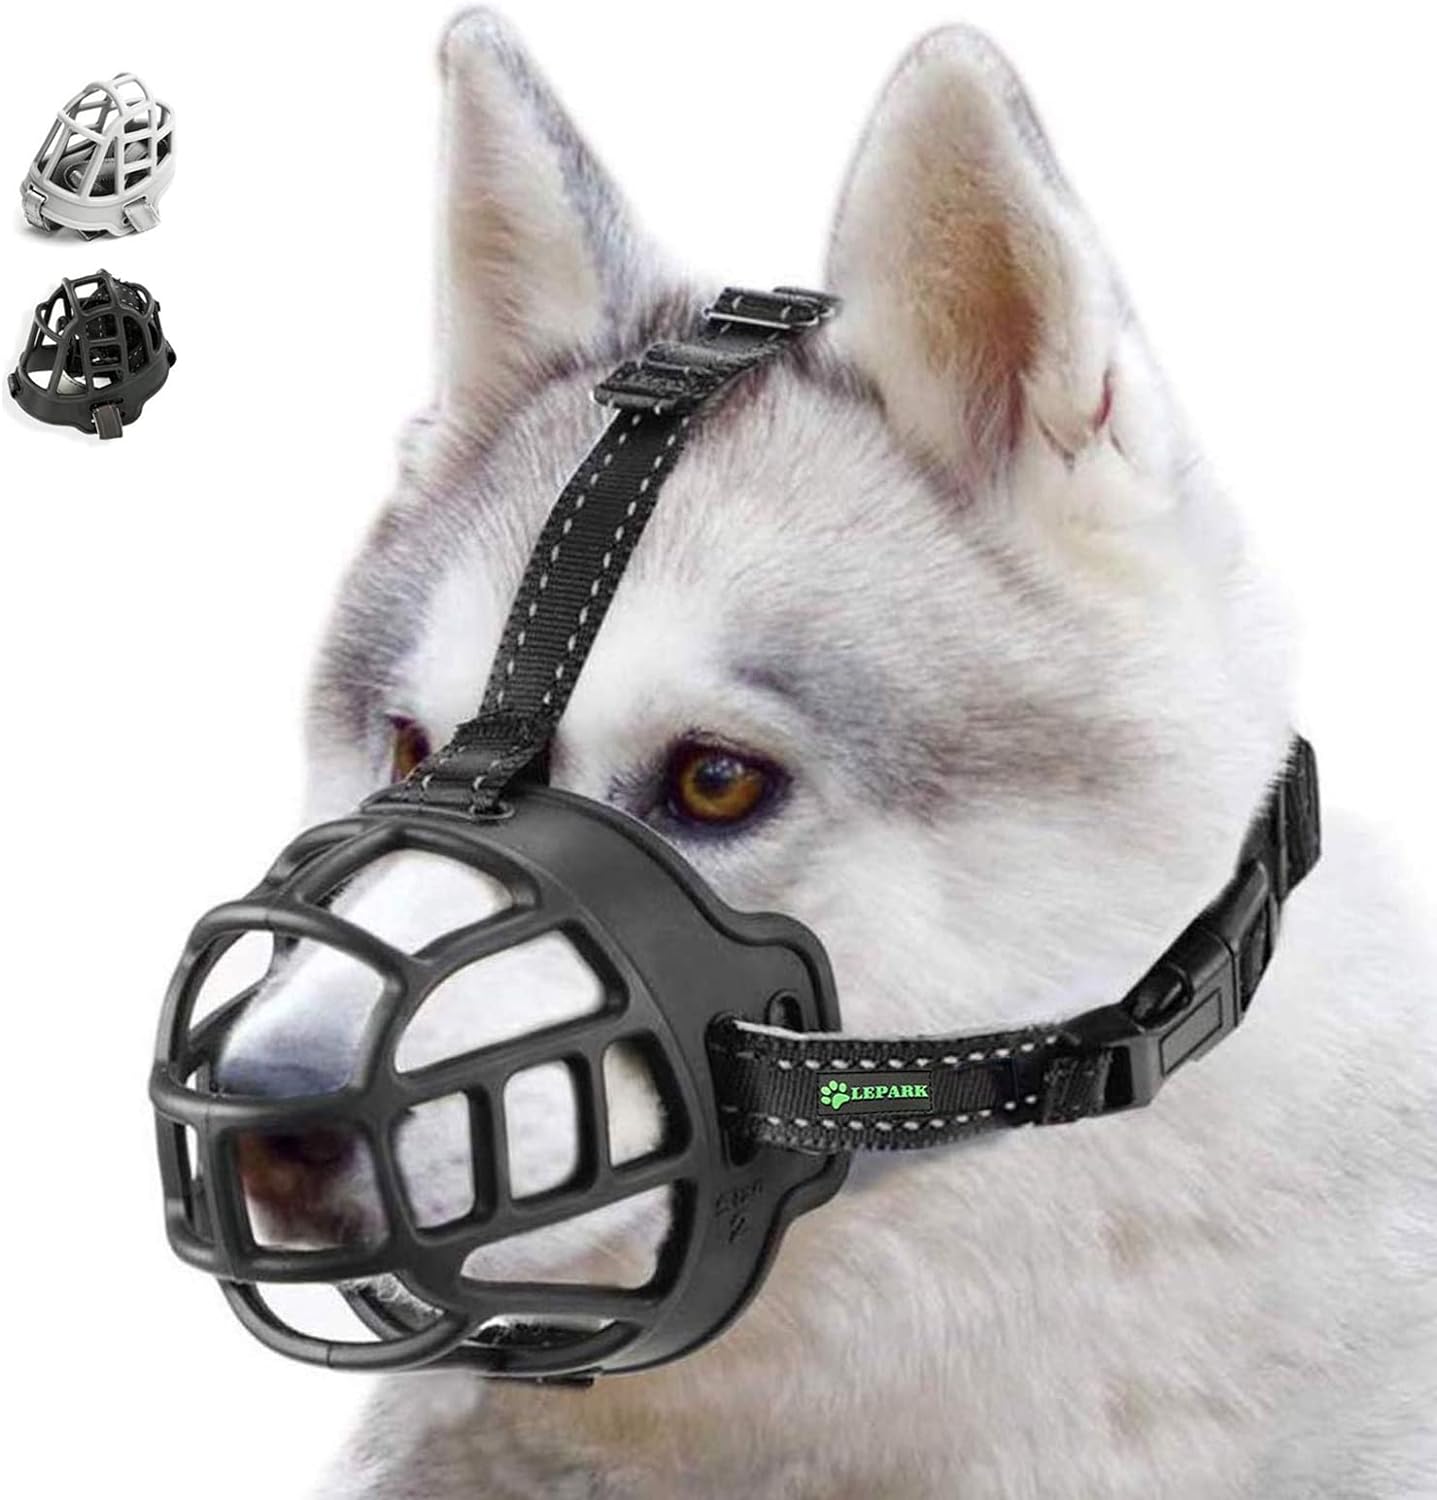 ILEPARK Dog Muzzle, Soft Silicone Basket Muzzle for Dogs, Breathable Mouth Cover and Adjustable Straps, Anti-Biting, Barking and Chewing. (Size 2,Black)